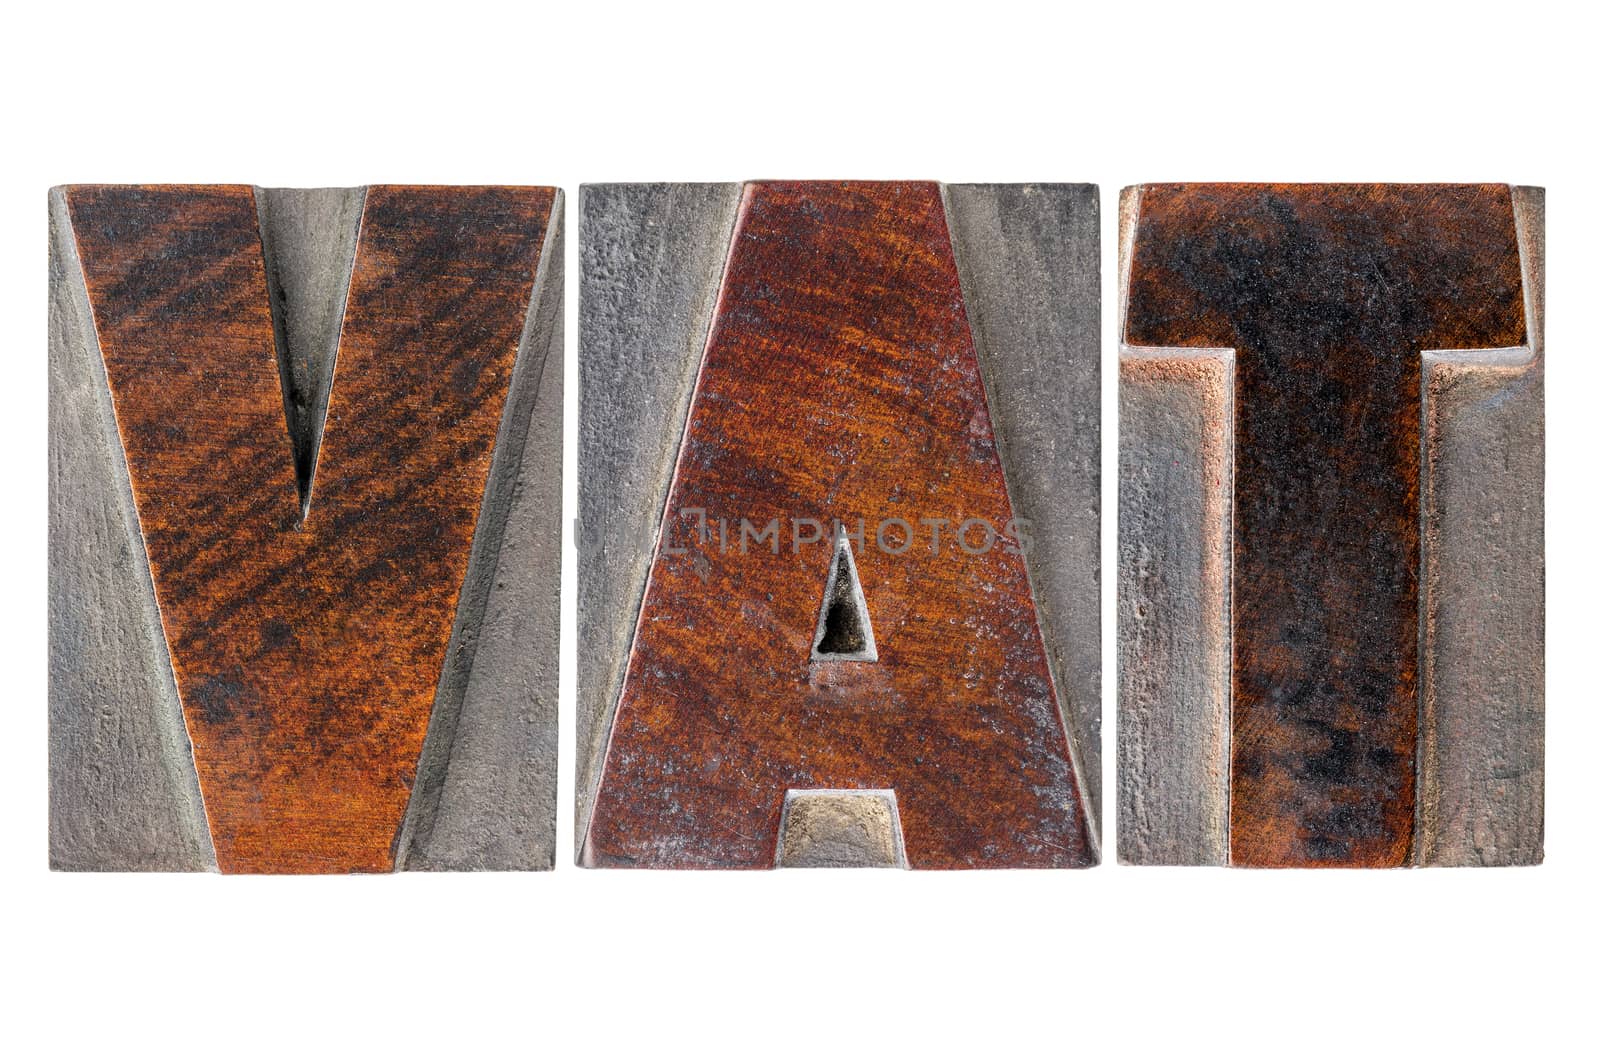 VAT (value added tax) - text in isolated letterpress wood type printing blocks